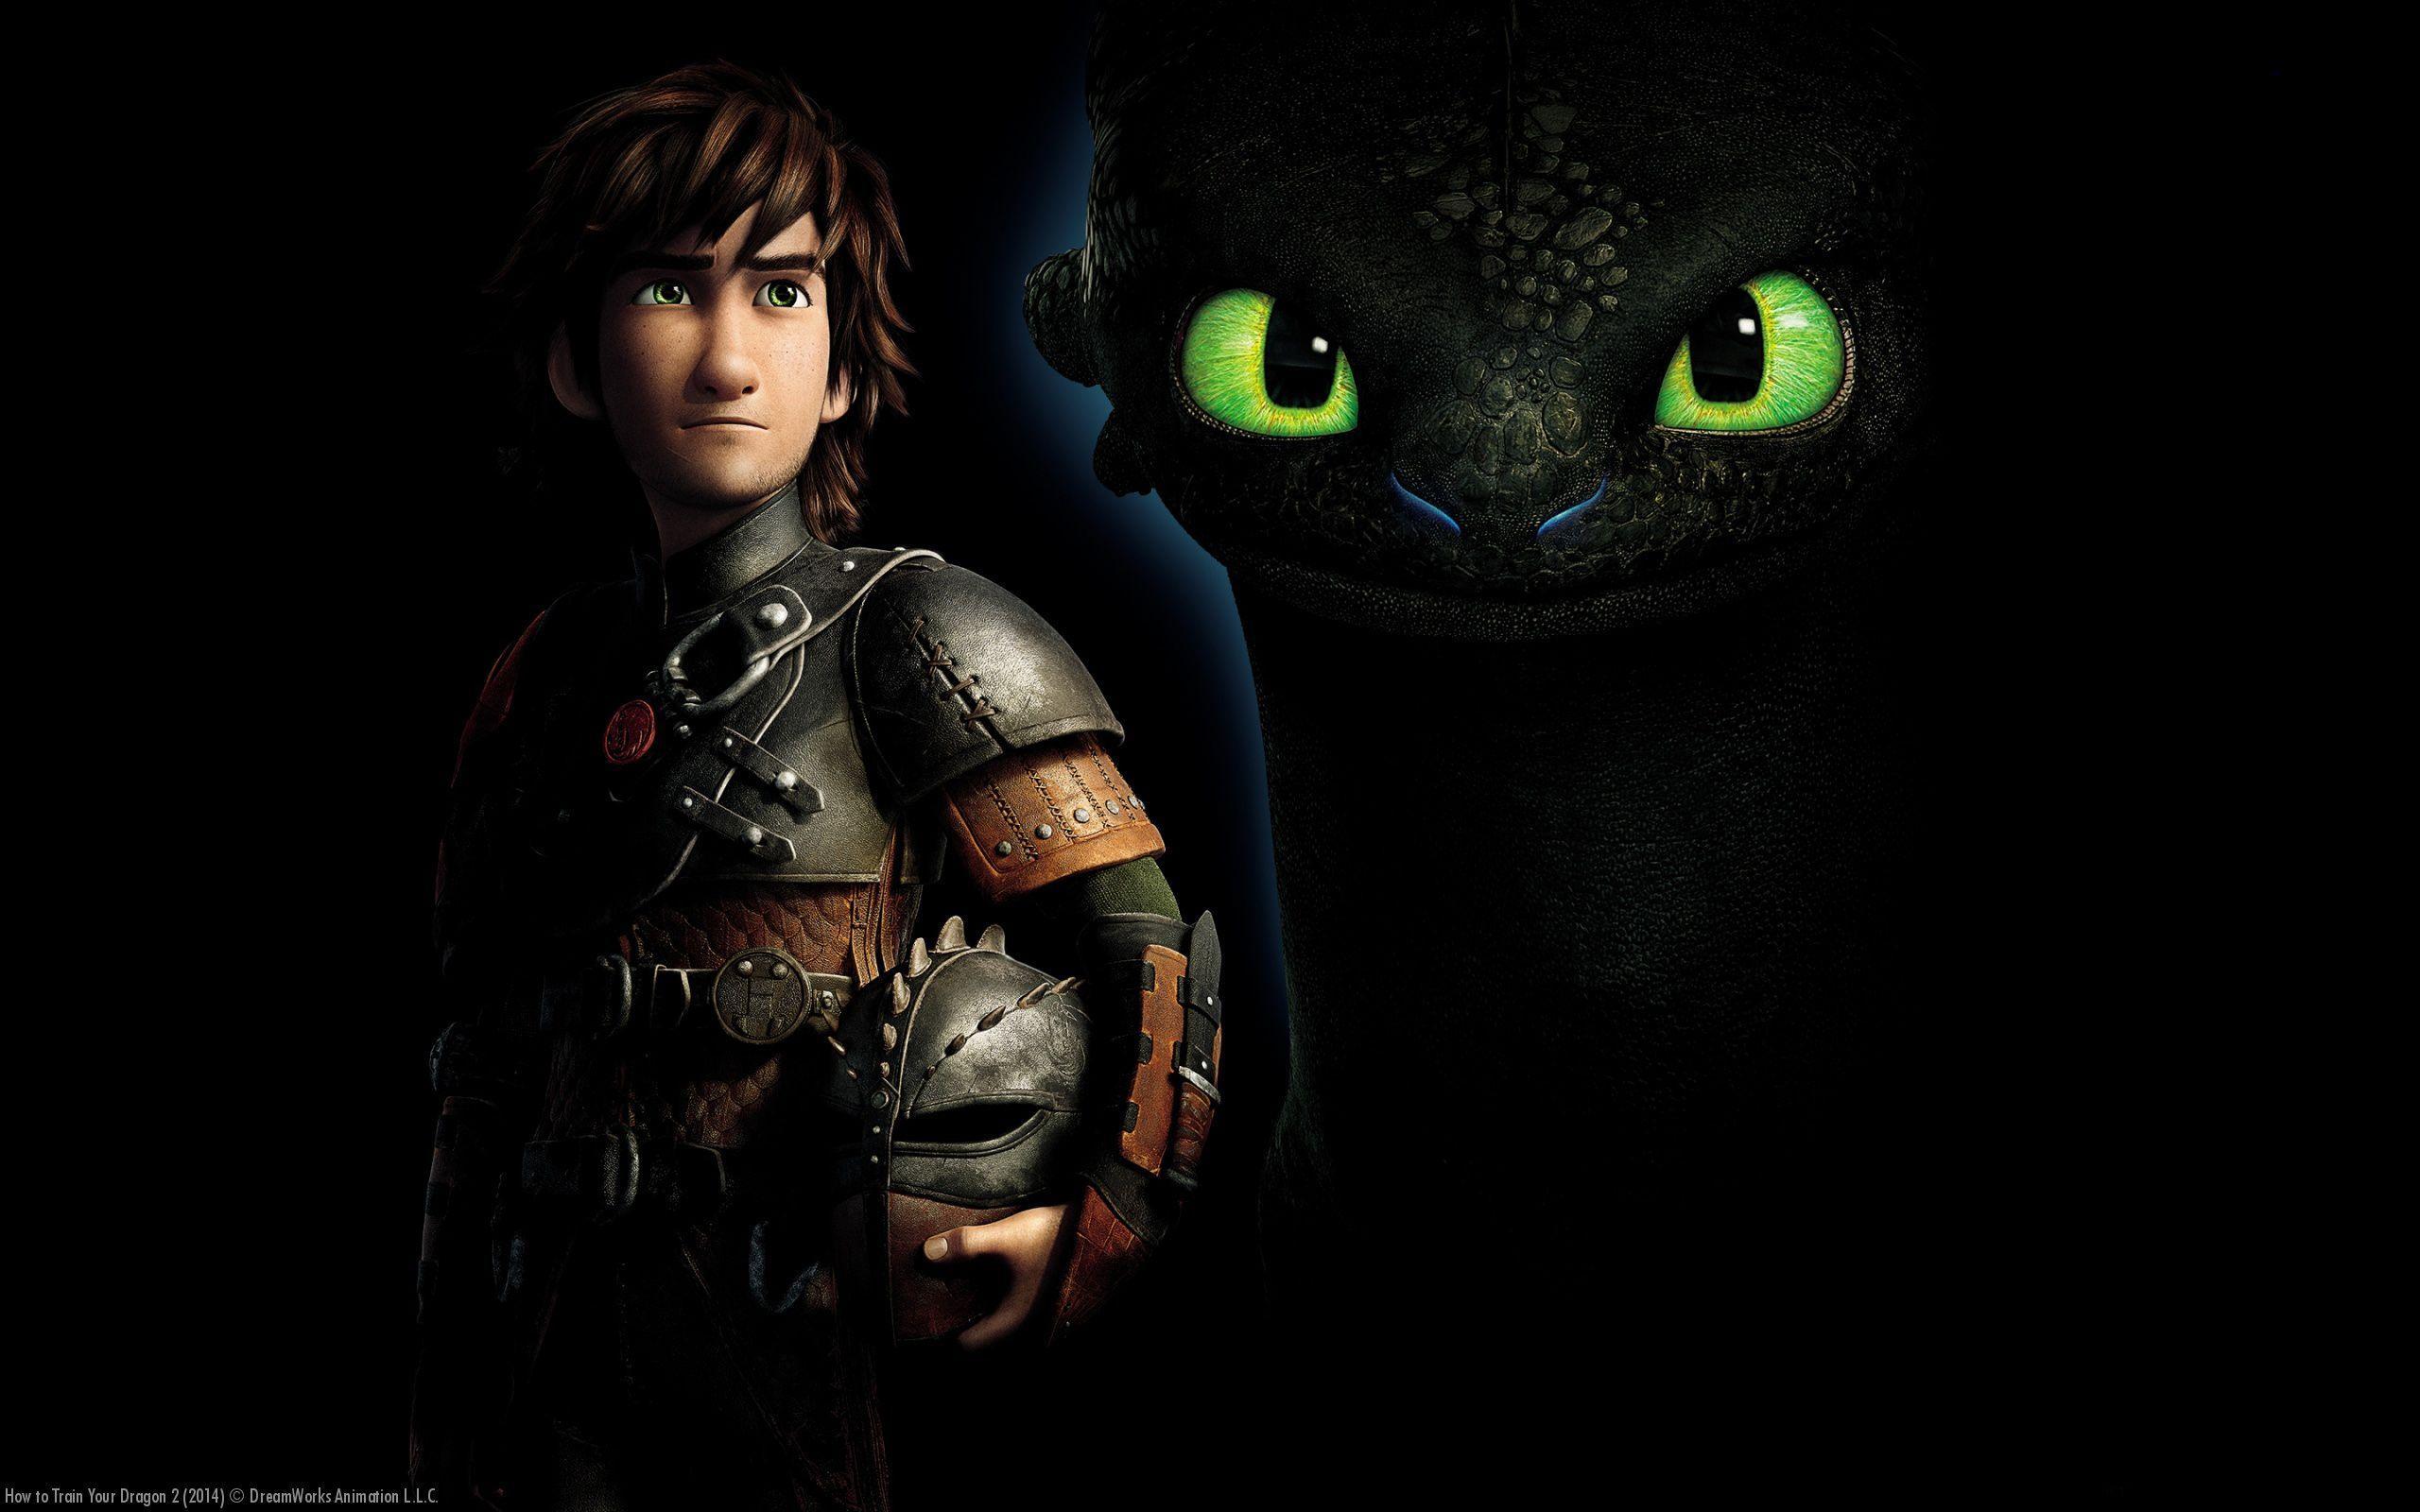 a boy and a dragon from animated movie "how to train your dragon"